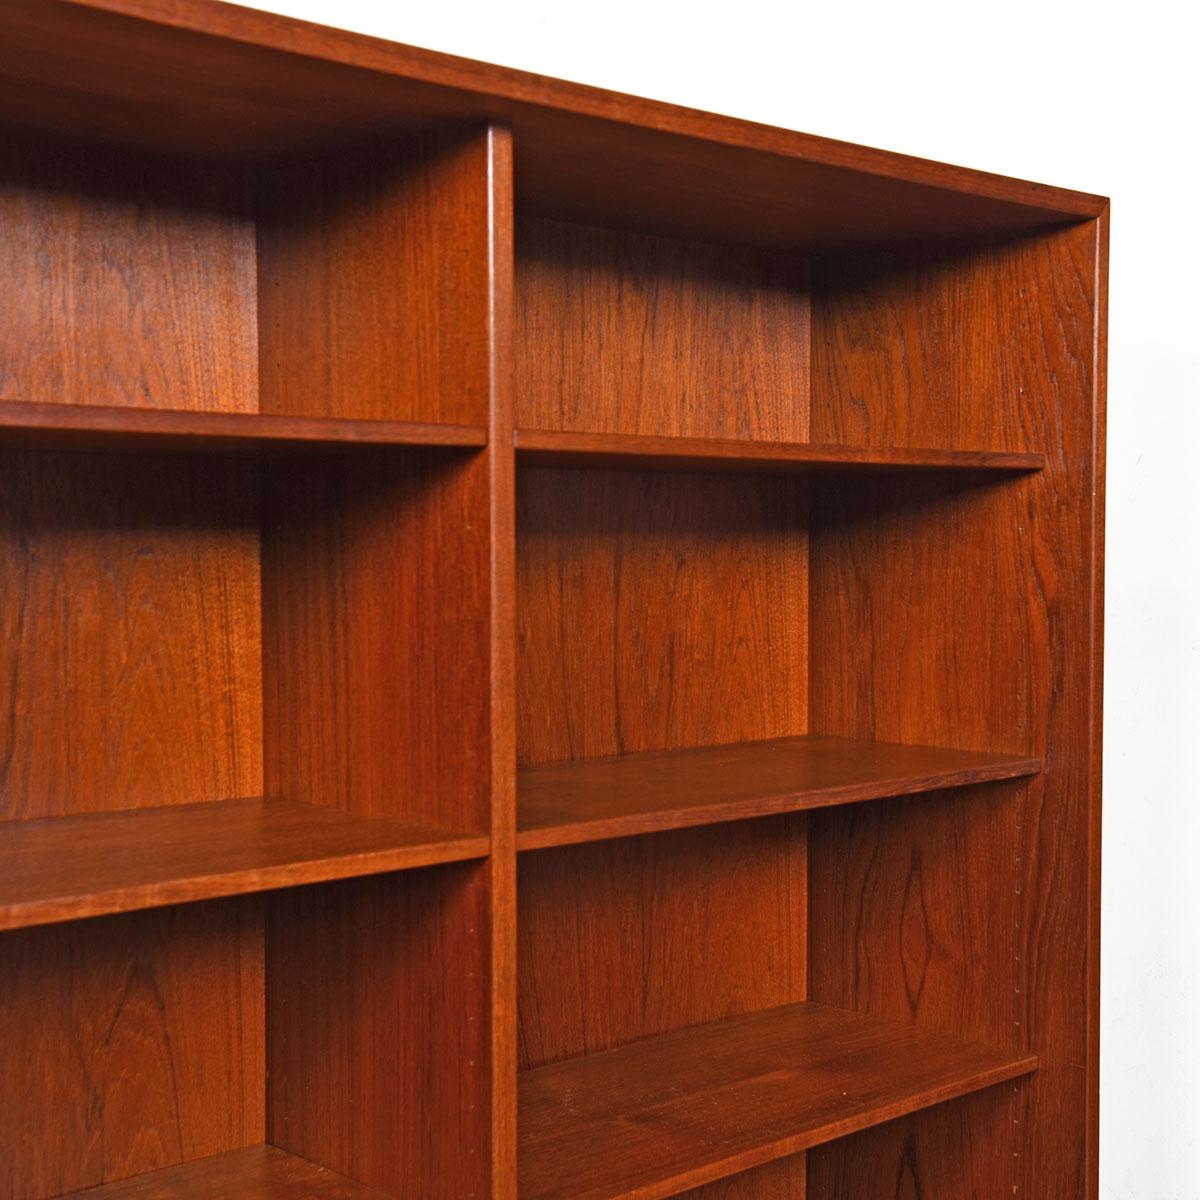 Early Danish Teak Deep Adjustable Bookcase In Good Condition For Sale In Kensington, MD